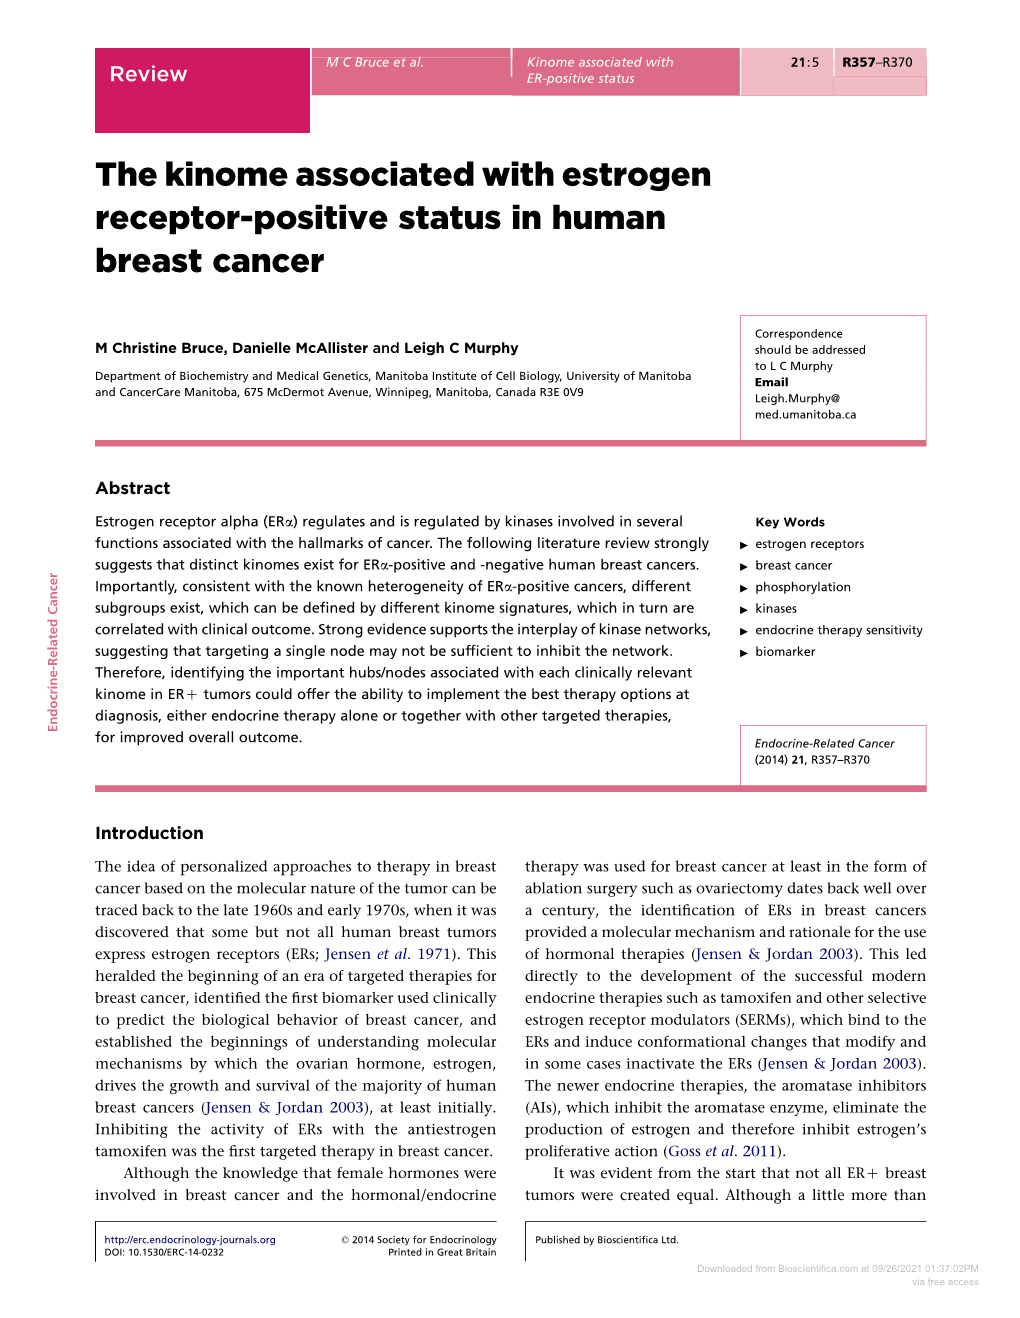 The Kinome Associated with Estrogen Receptor-Positive Status in Human Breast Cancer